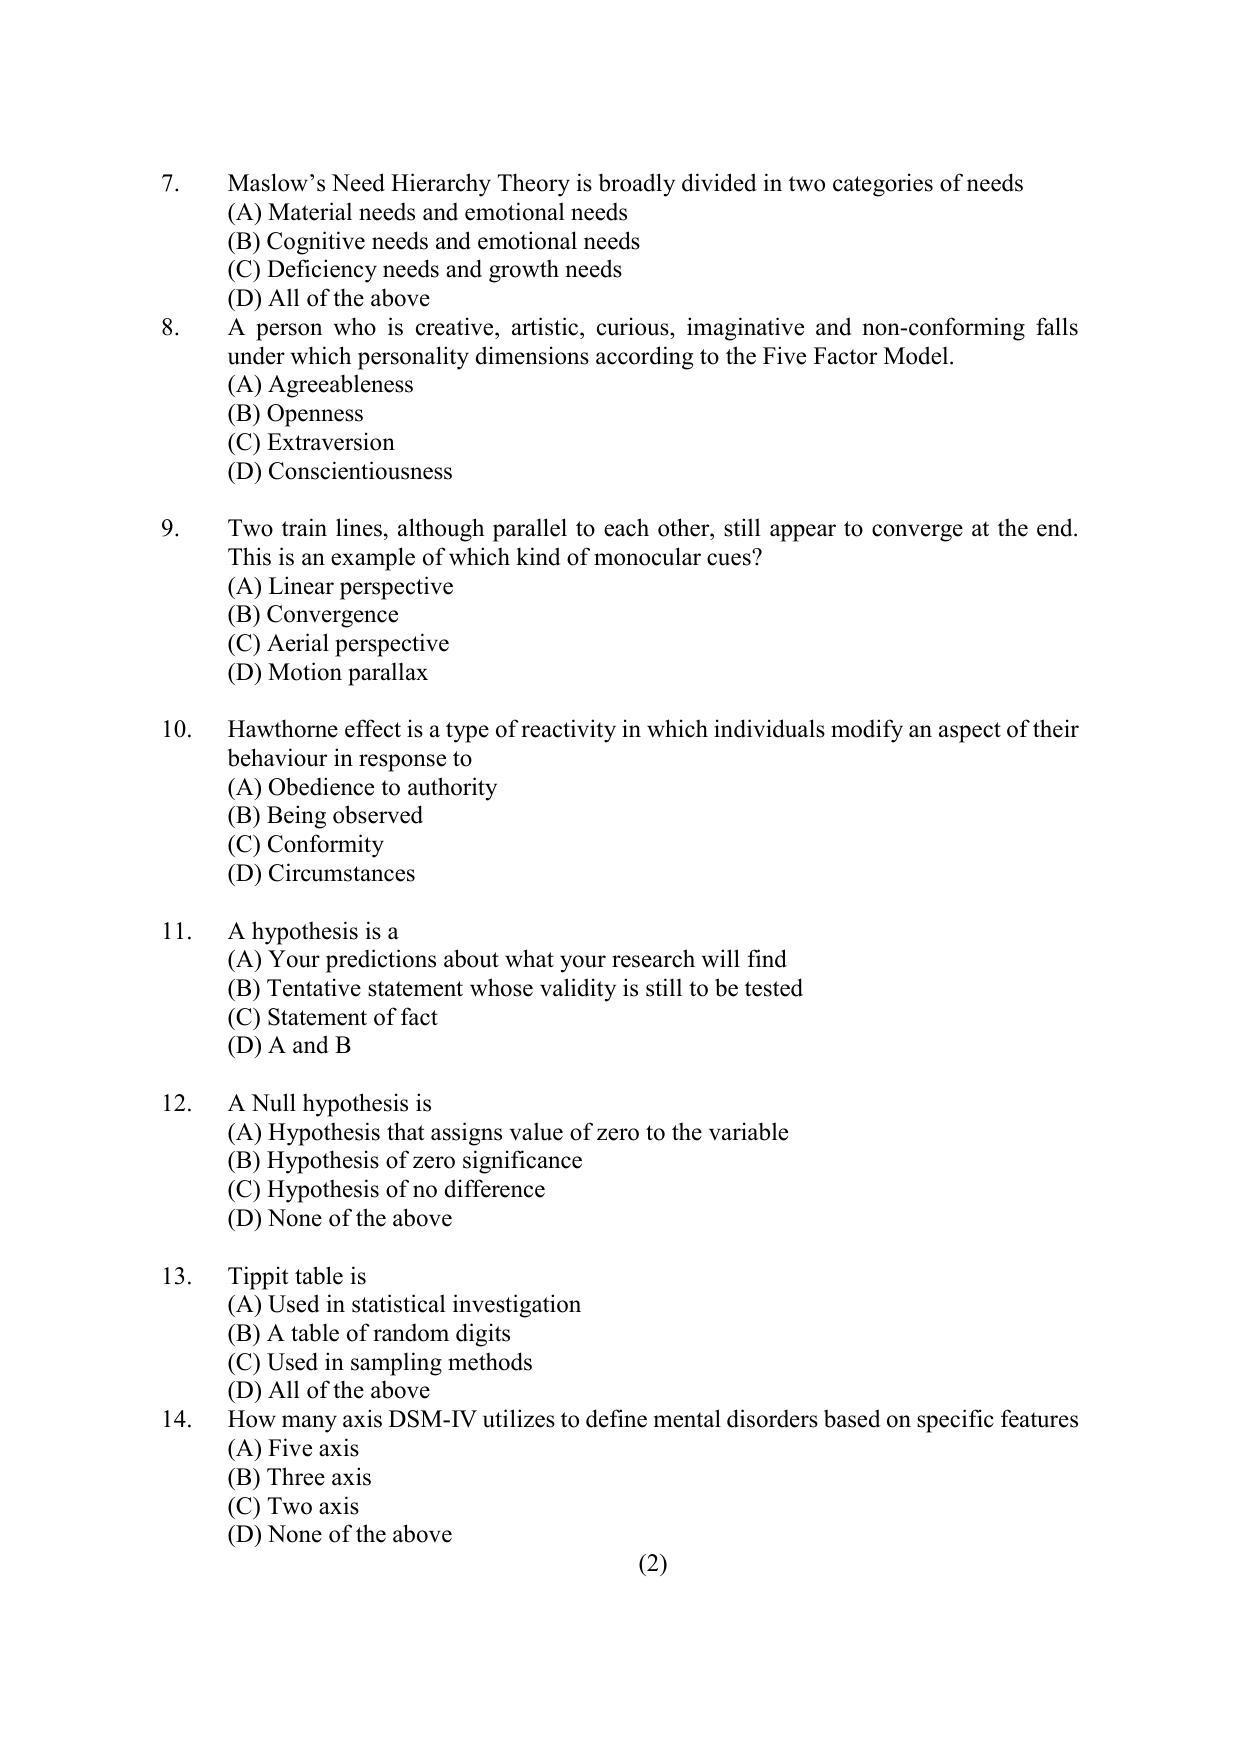 PU MPET Ancient Indian History & Archeology 2022 Question Papers - Page 33